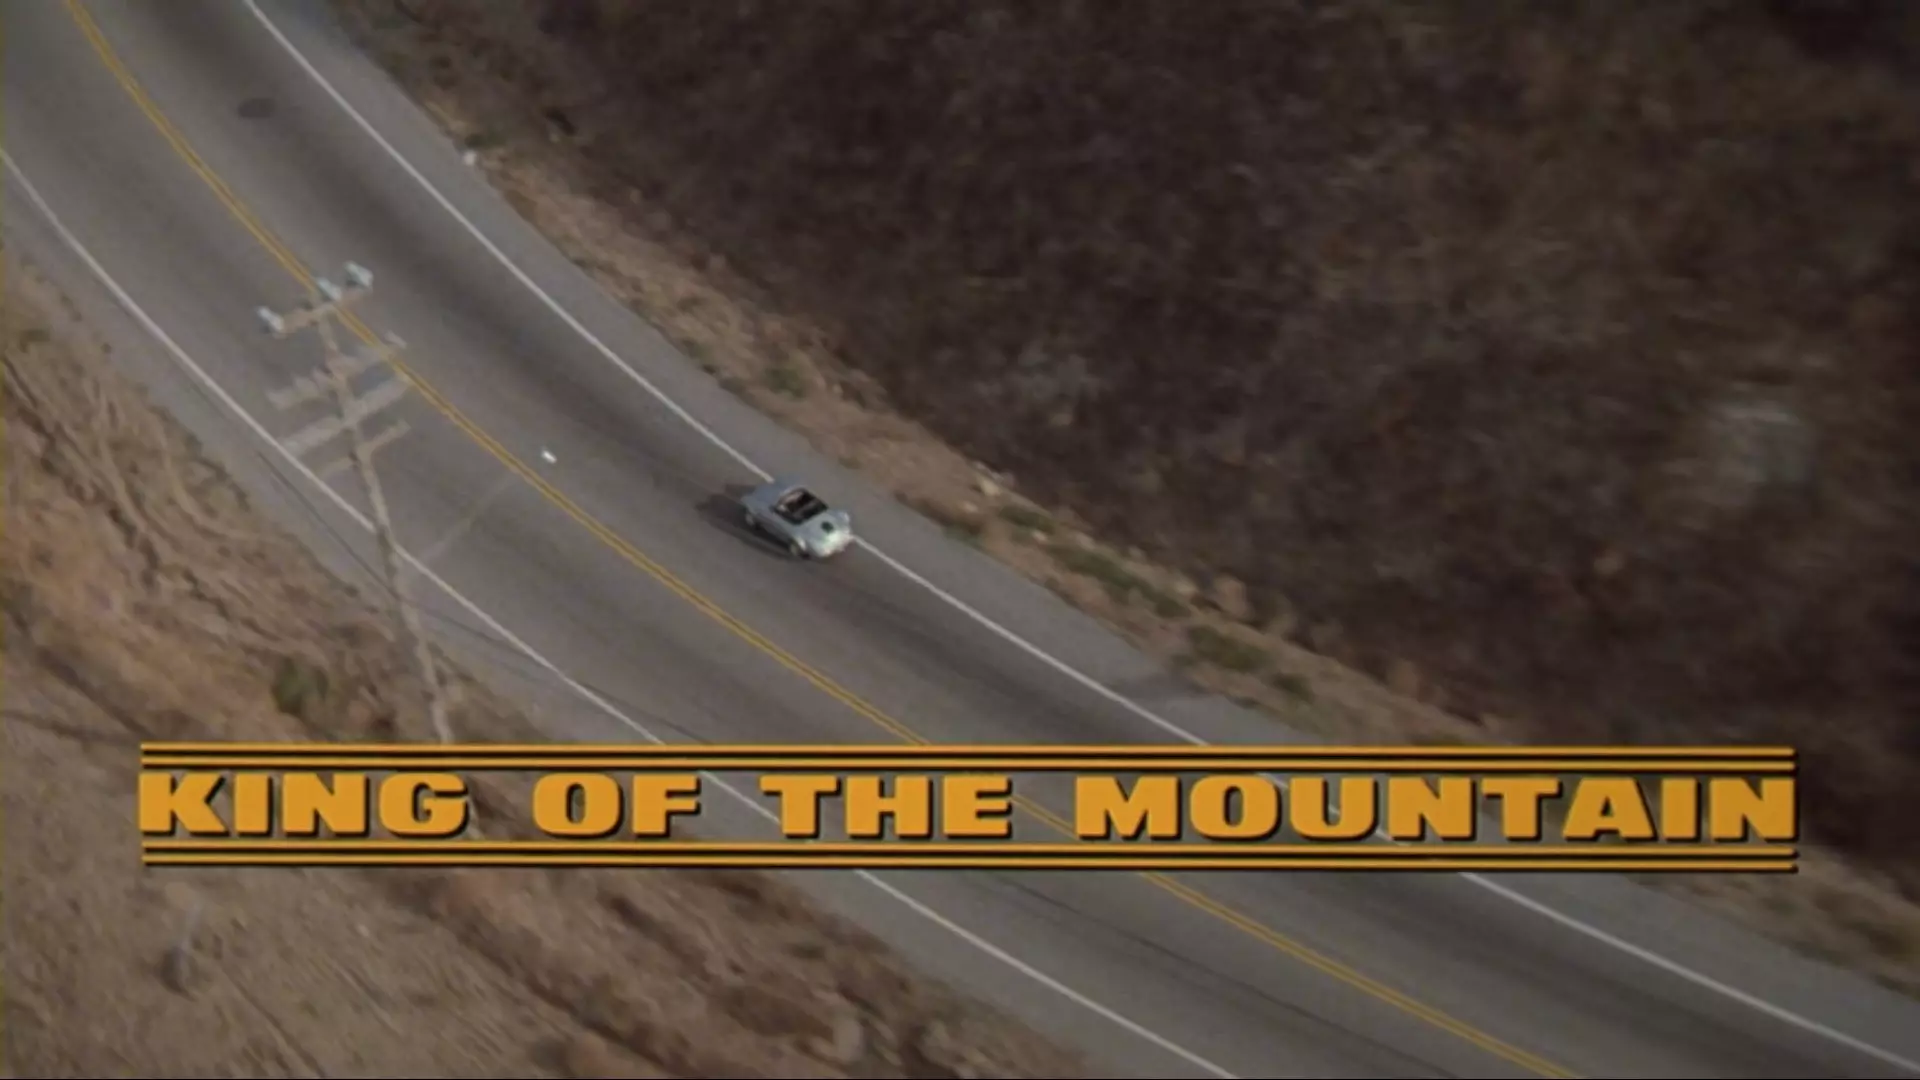 The 1981 Movie King of the Mountain Is Full of Refreshingly Real Car Action